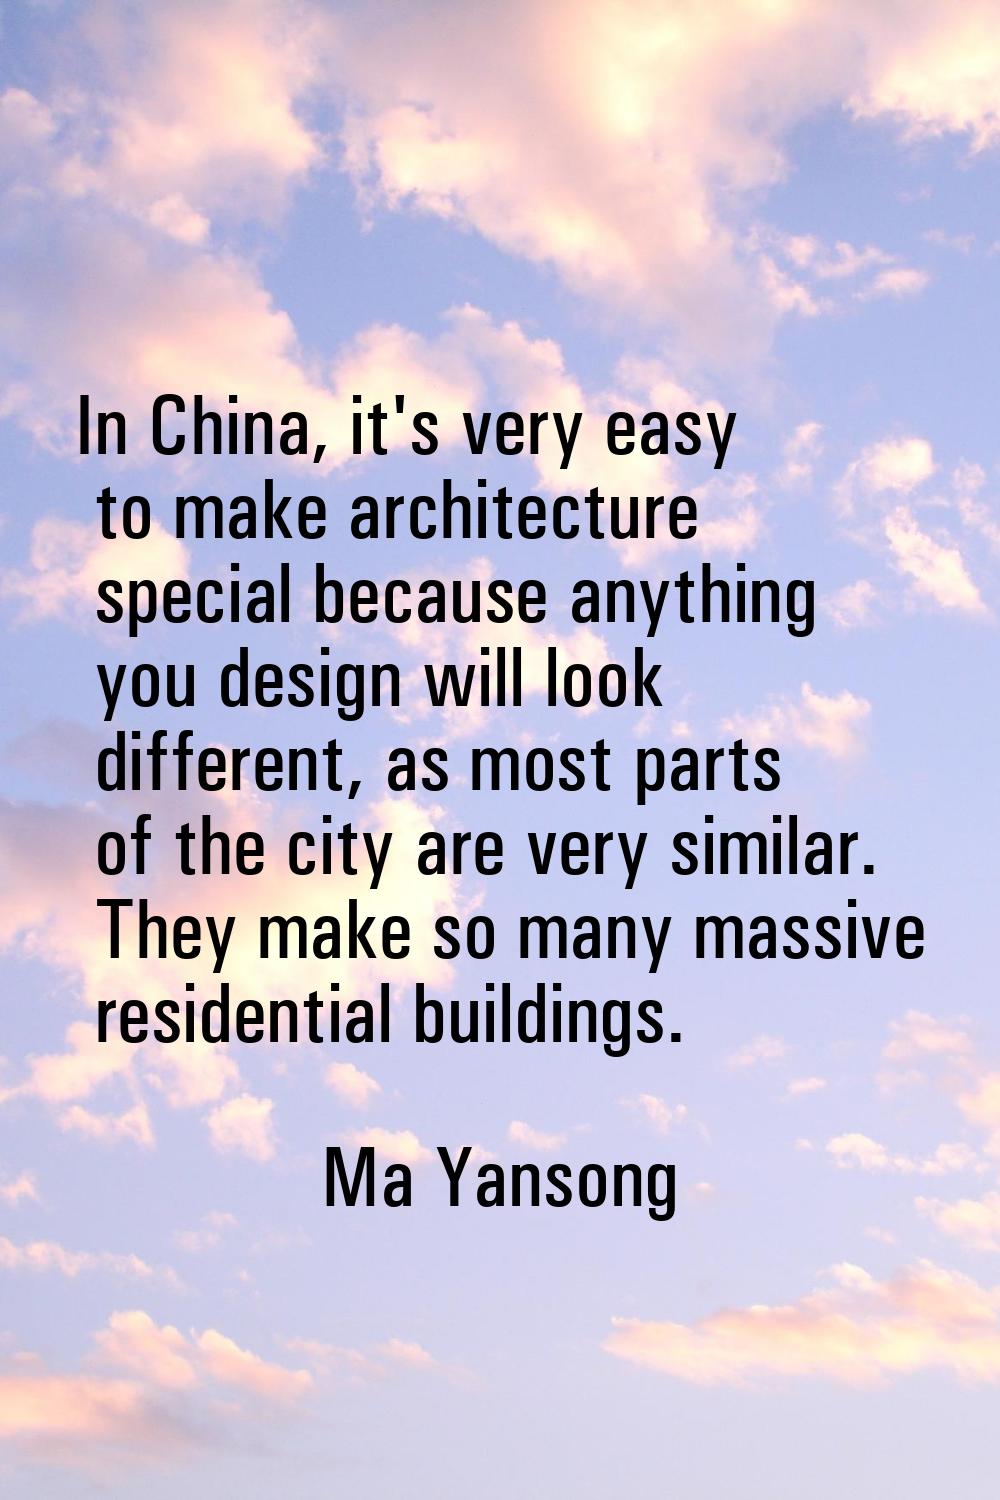 In China, it's very easy to make architecture special because anything you design will look differe